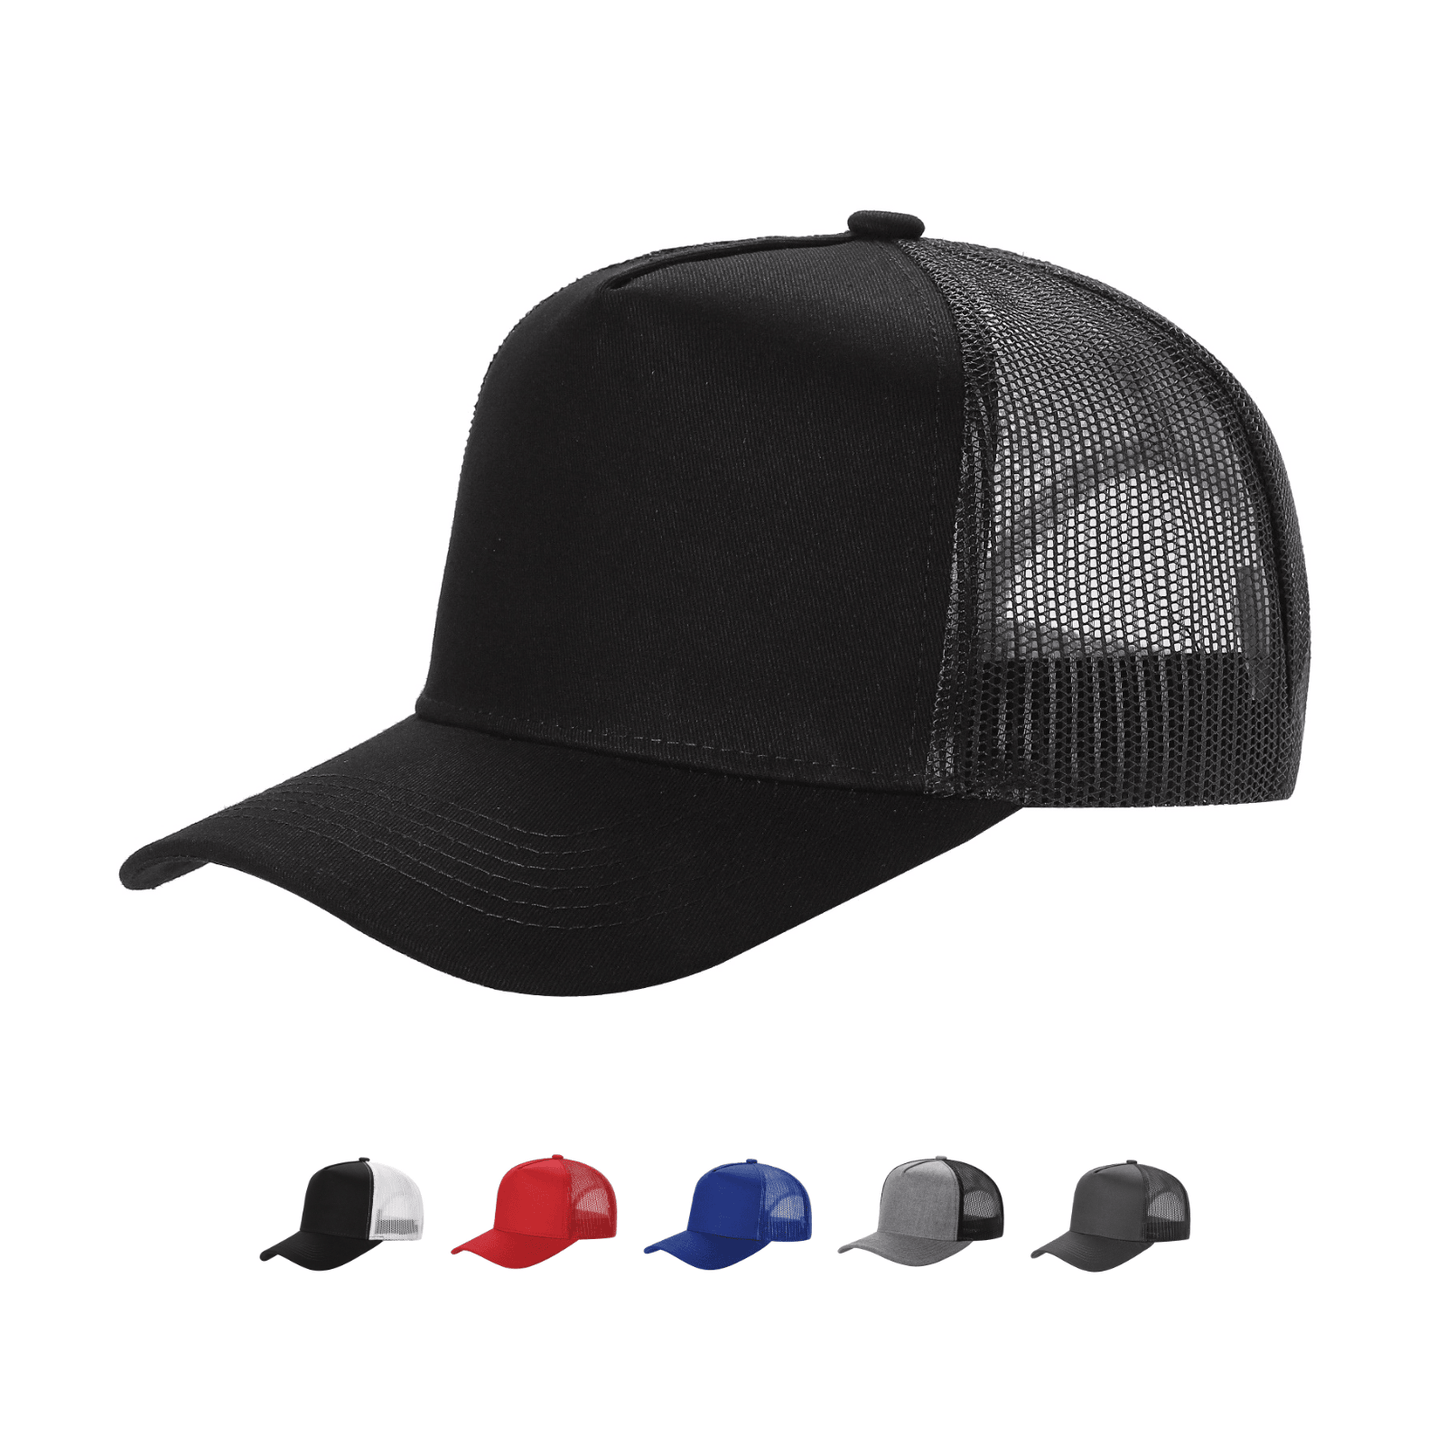 5CTM - Solid & 2-Tone Cotton/Poly Hat